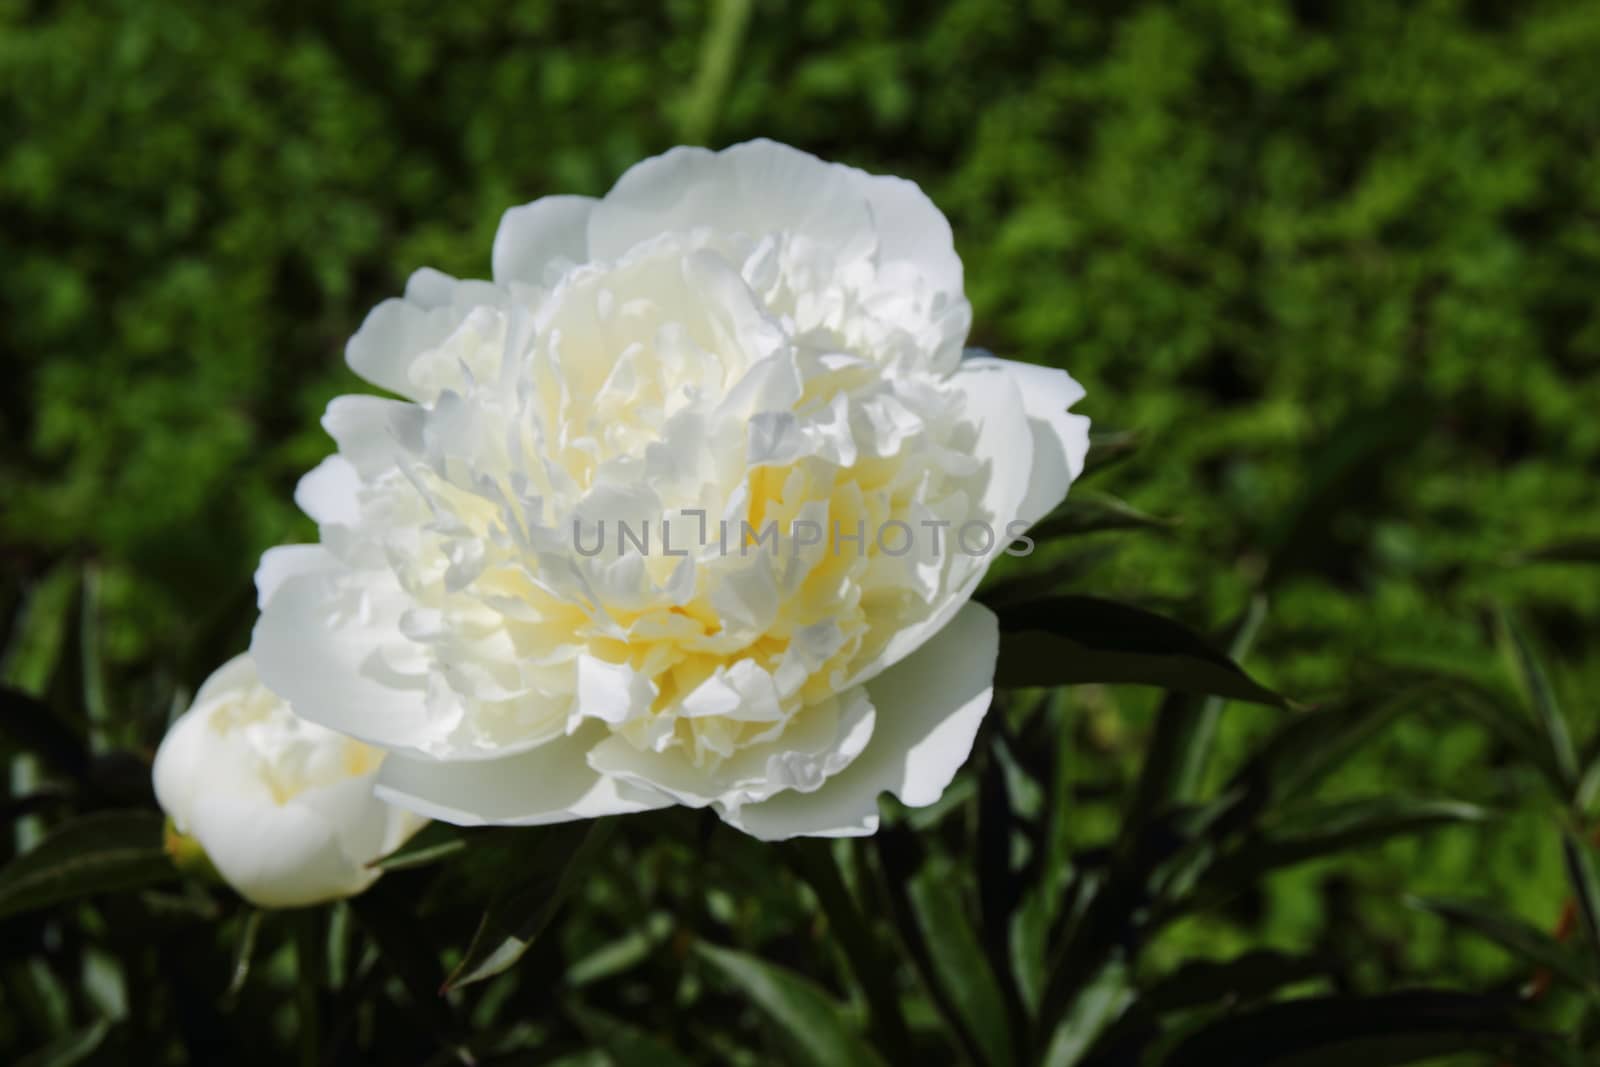 white peonies in the garden. Floristry and Horticulture